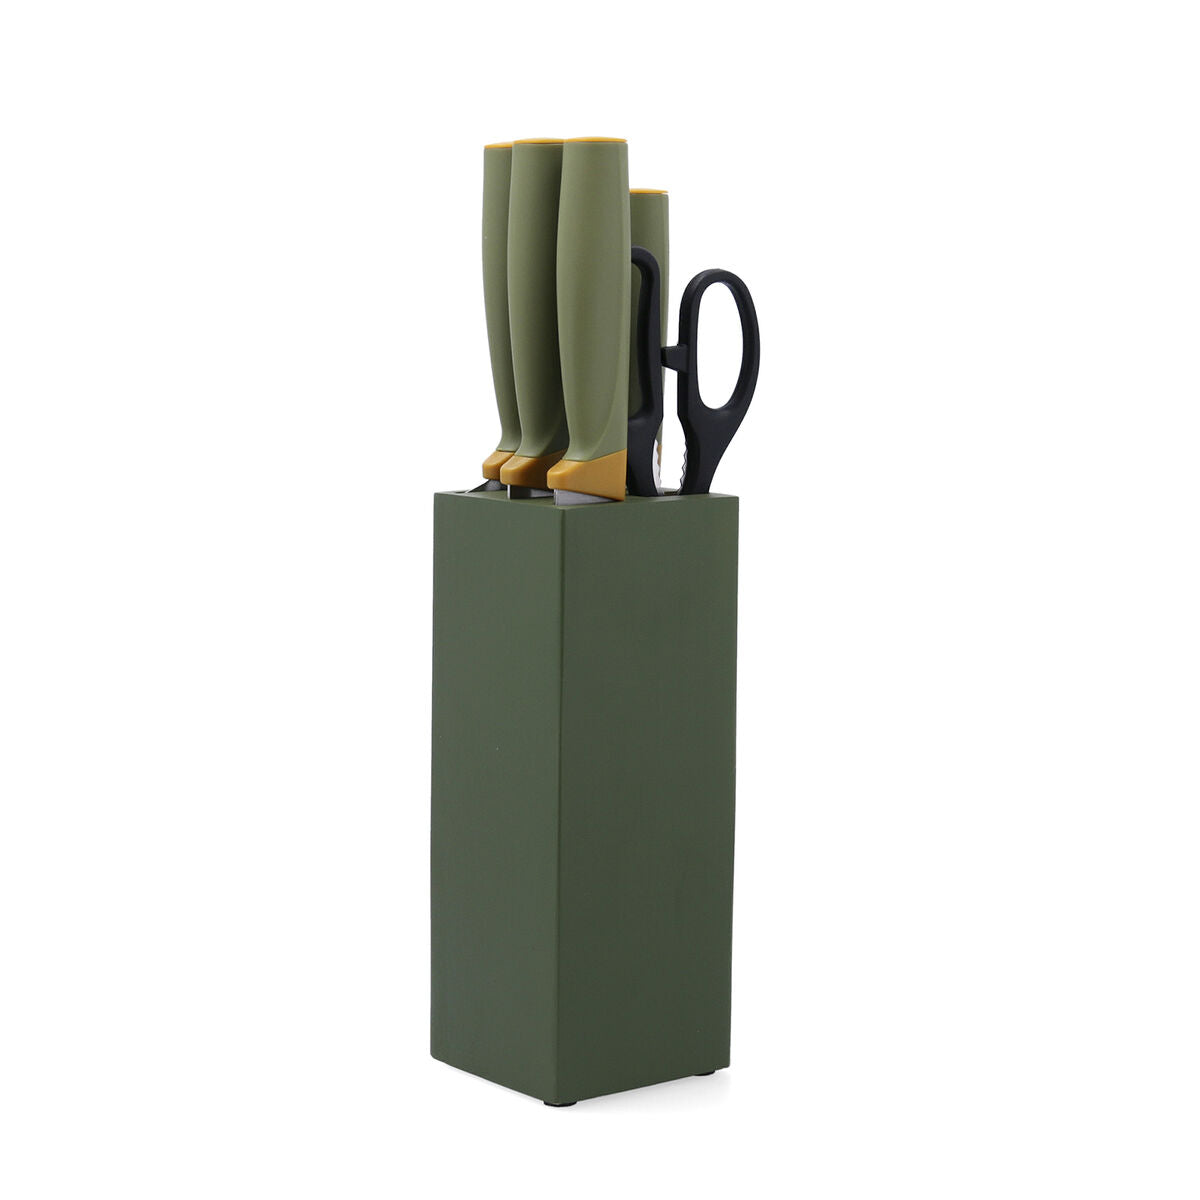 Knife set with olive green block